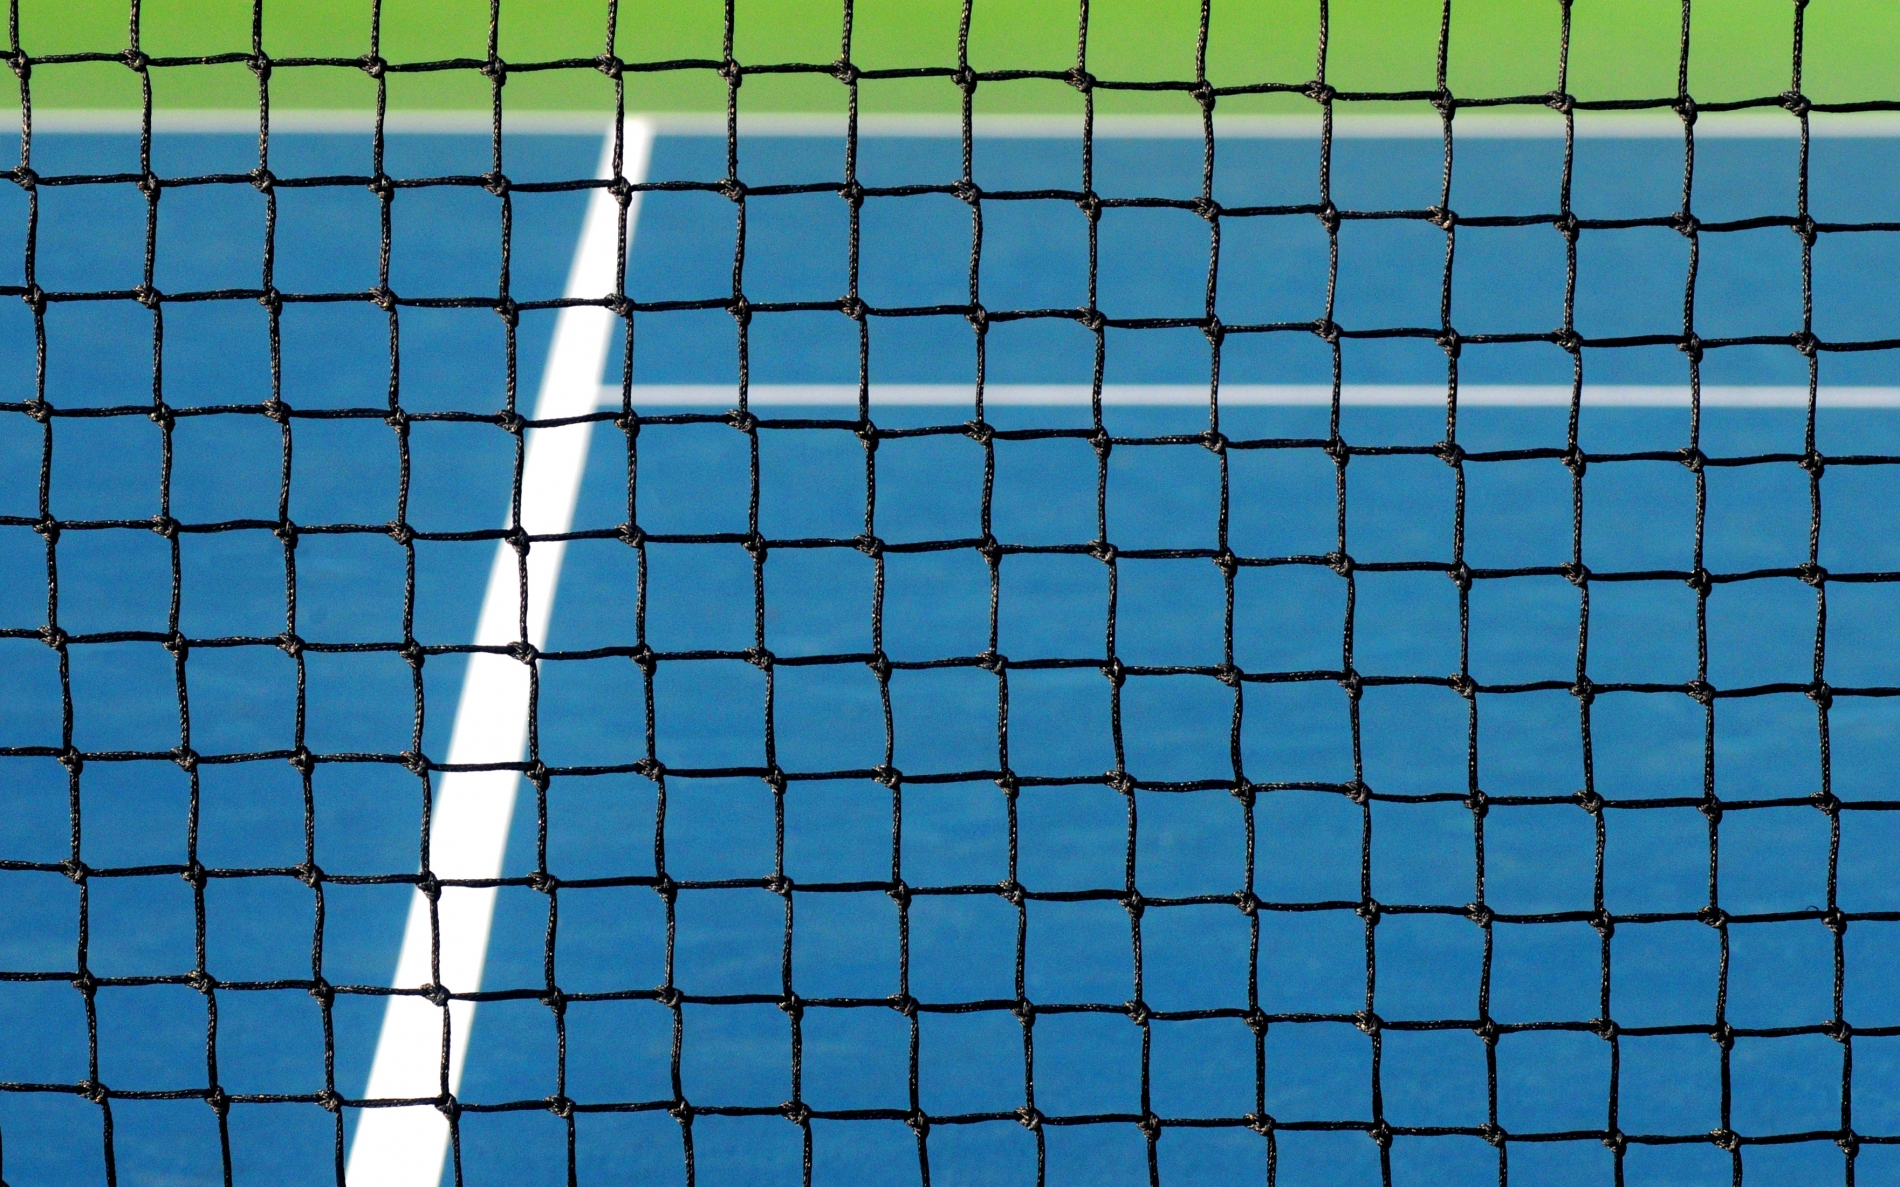 A blue tennis court with white lines looking through the black netting